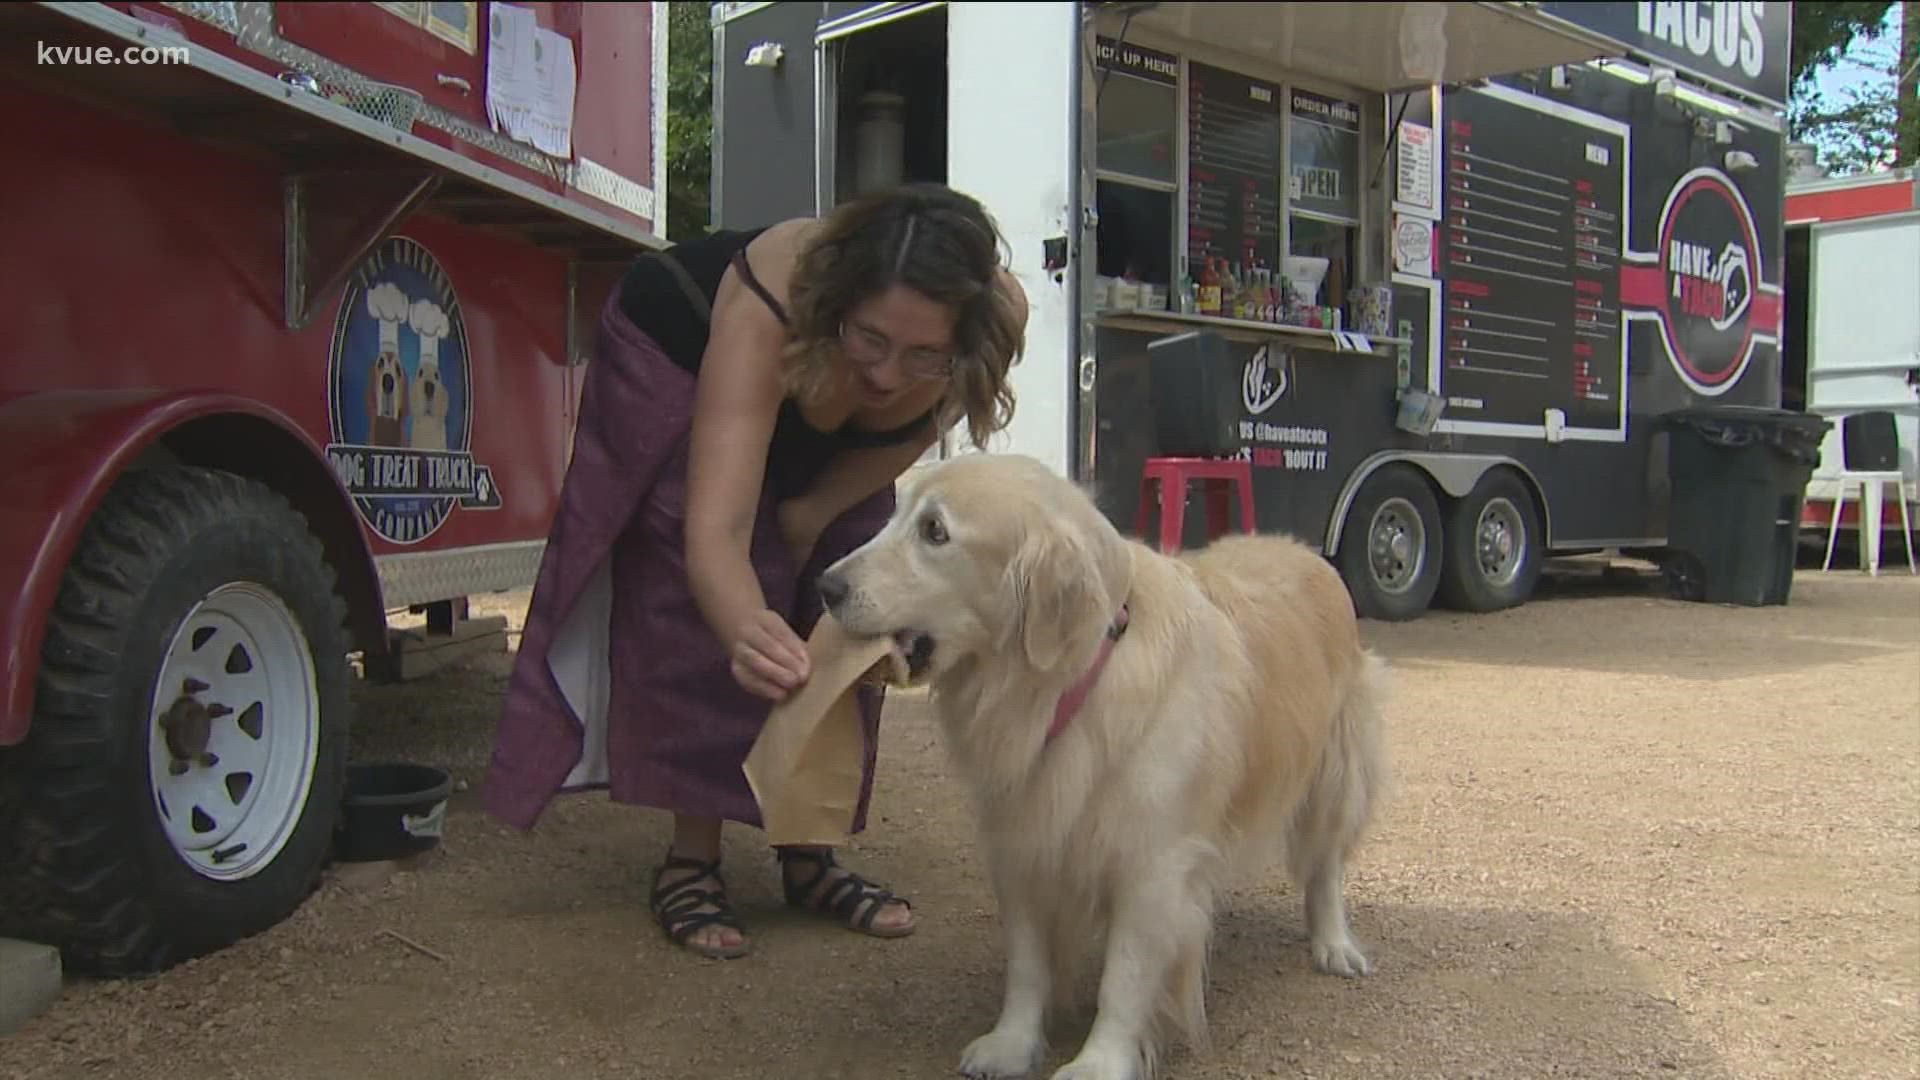 Food trucks and dog-friendly spaces are two things that make Austin a city people love. But there's one food truck that's just for dogs.